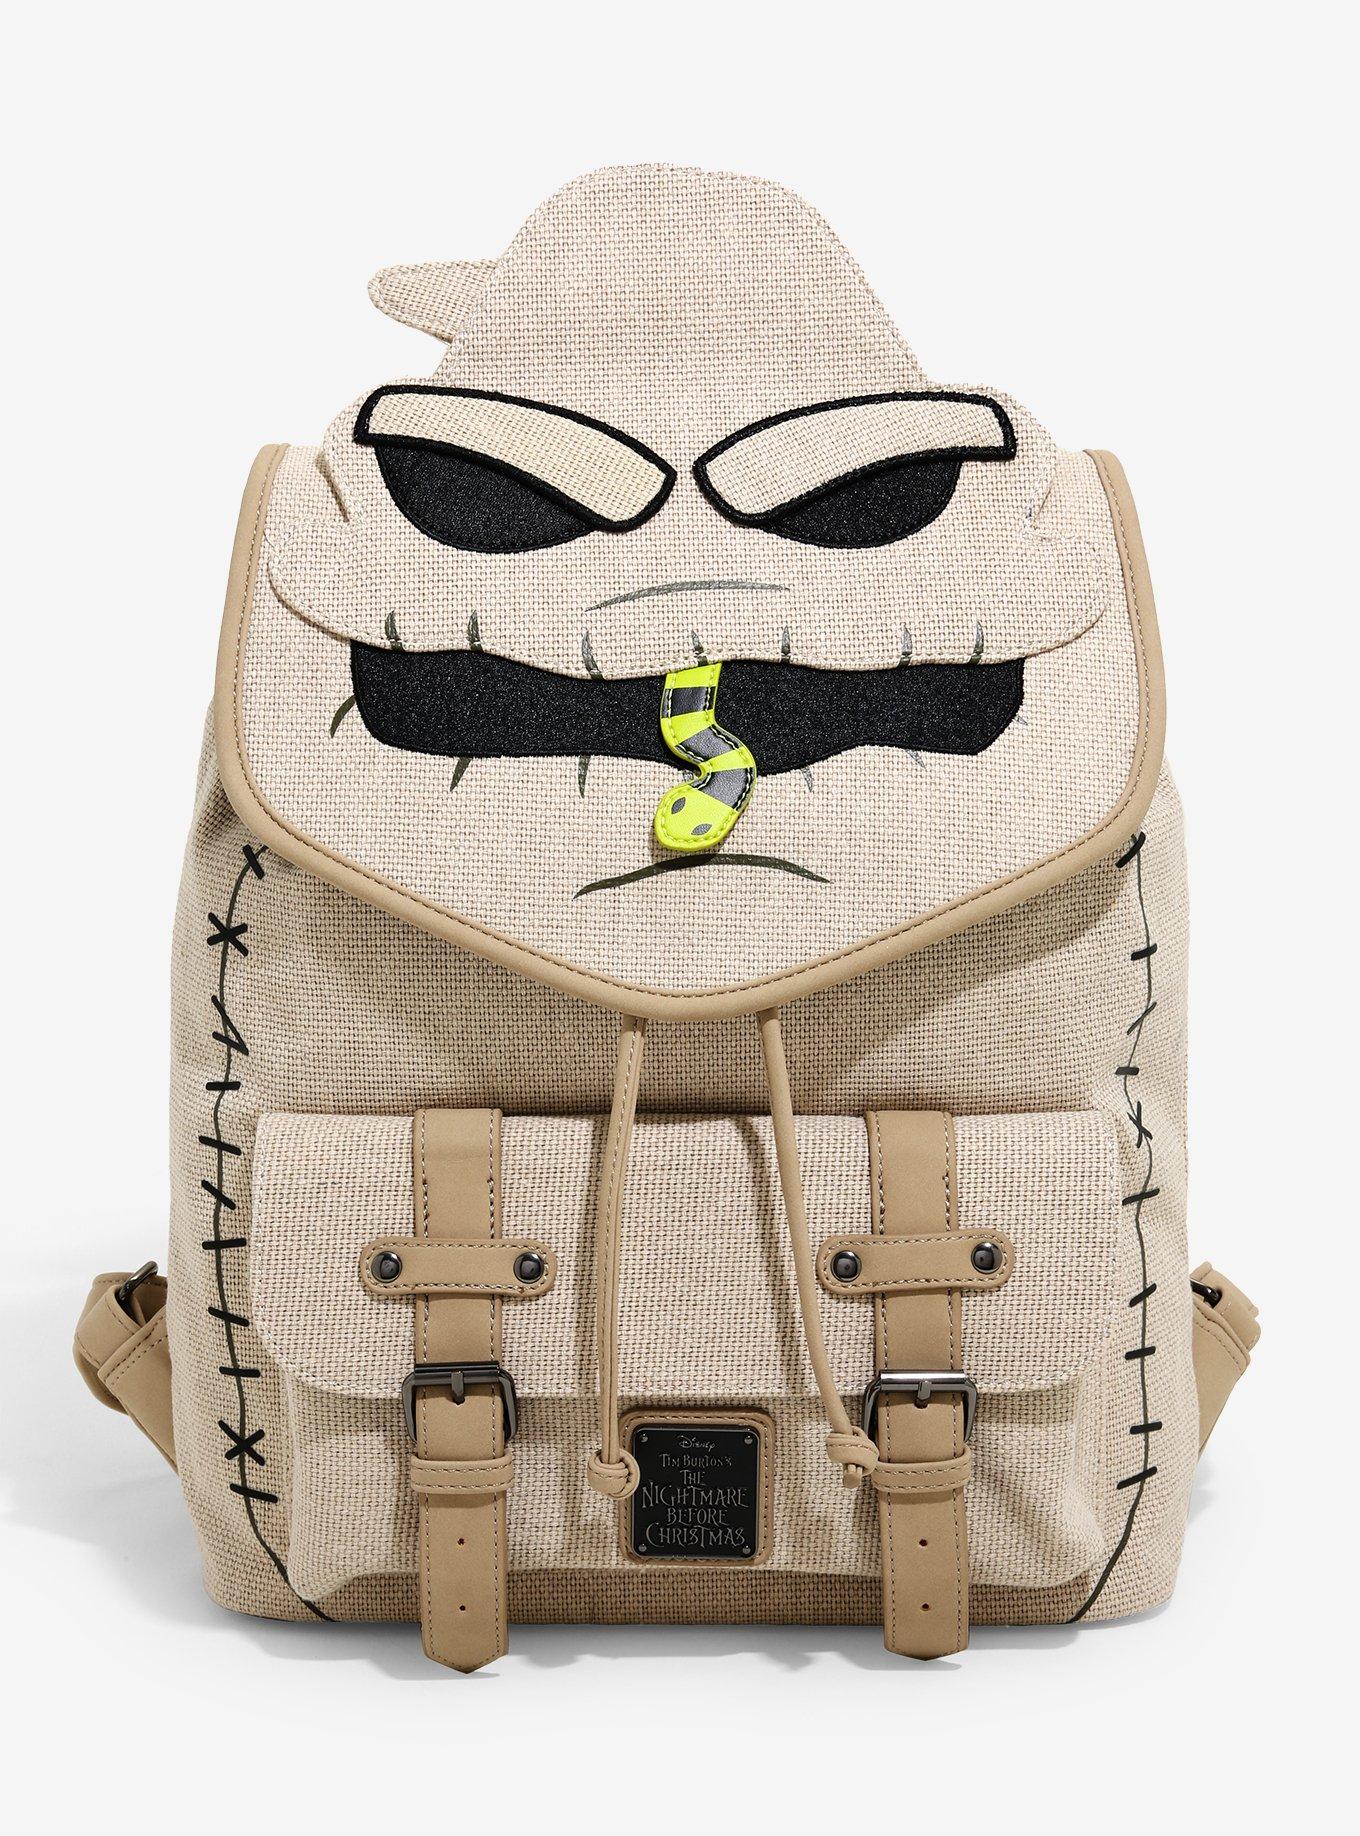 Loungefly+Oogie+Boogie+Mini+Backpack+-+Green for sale online